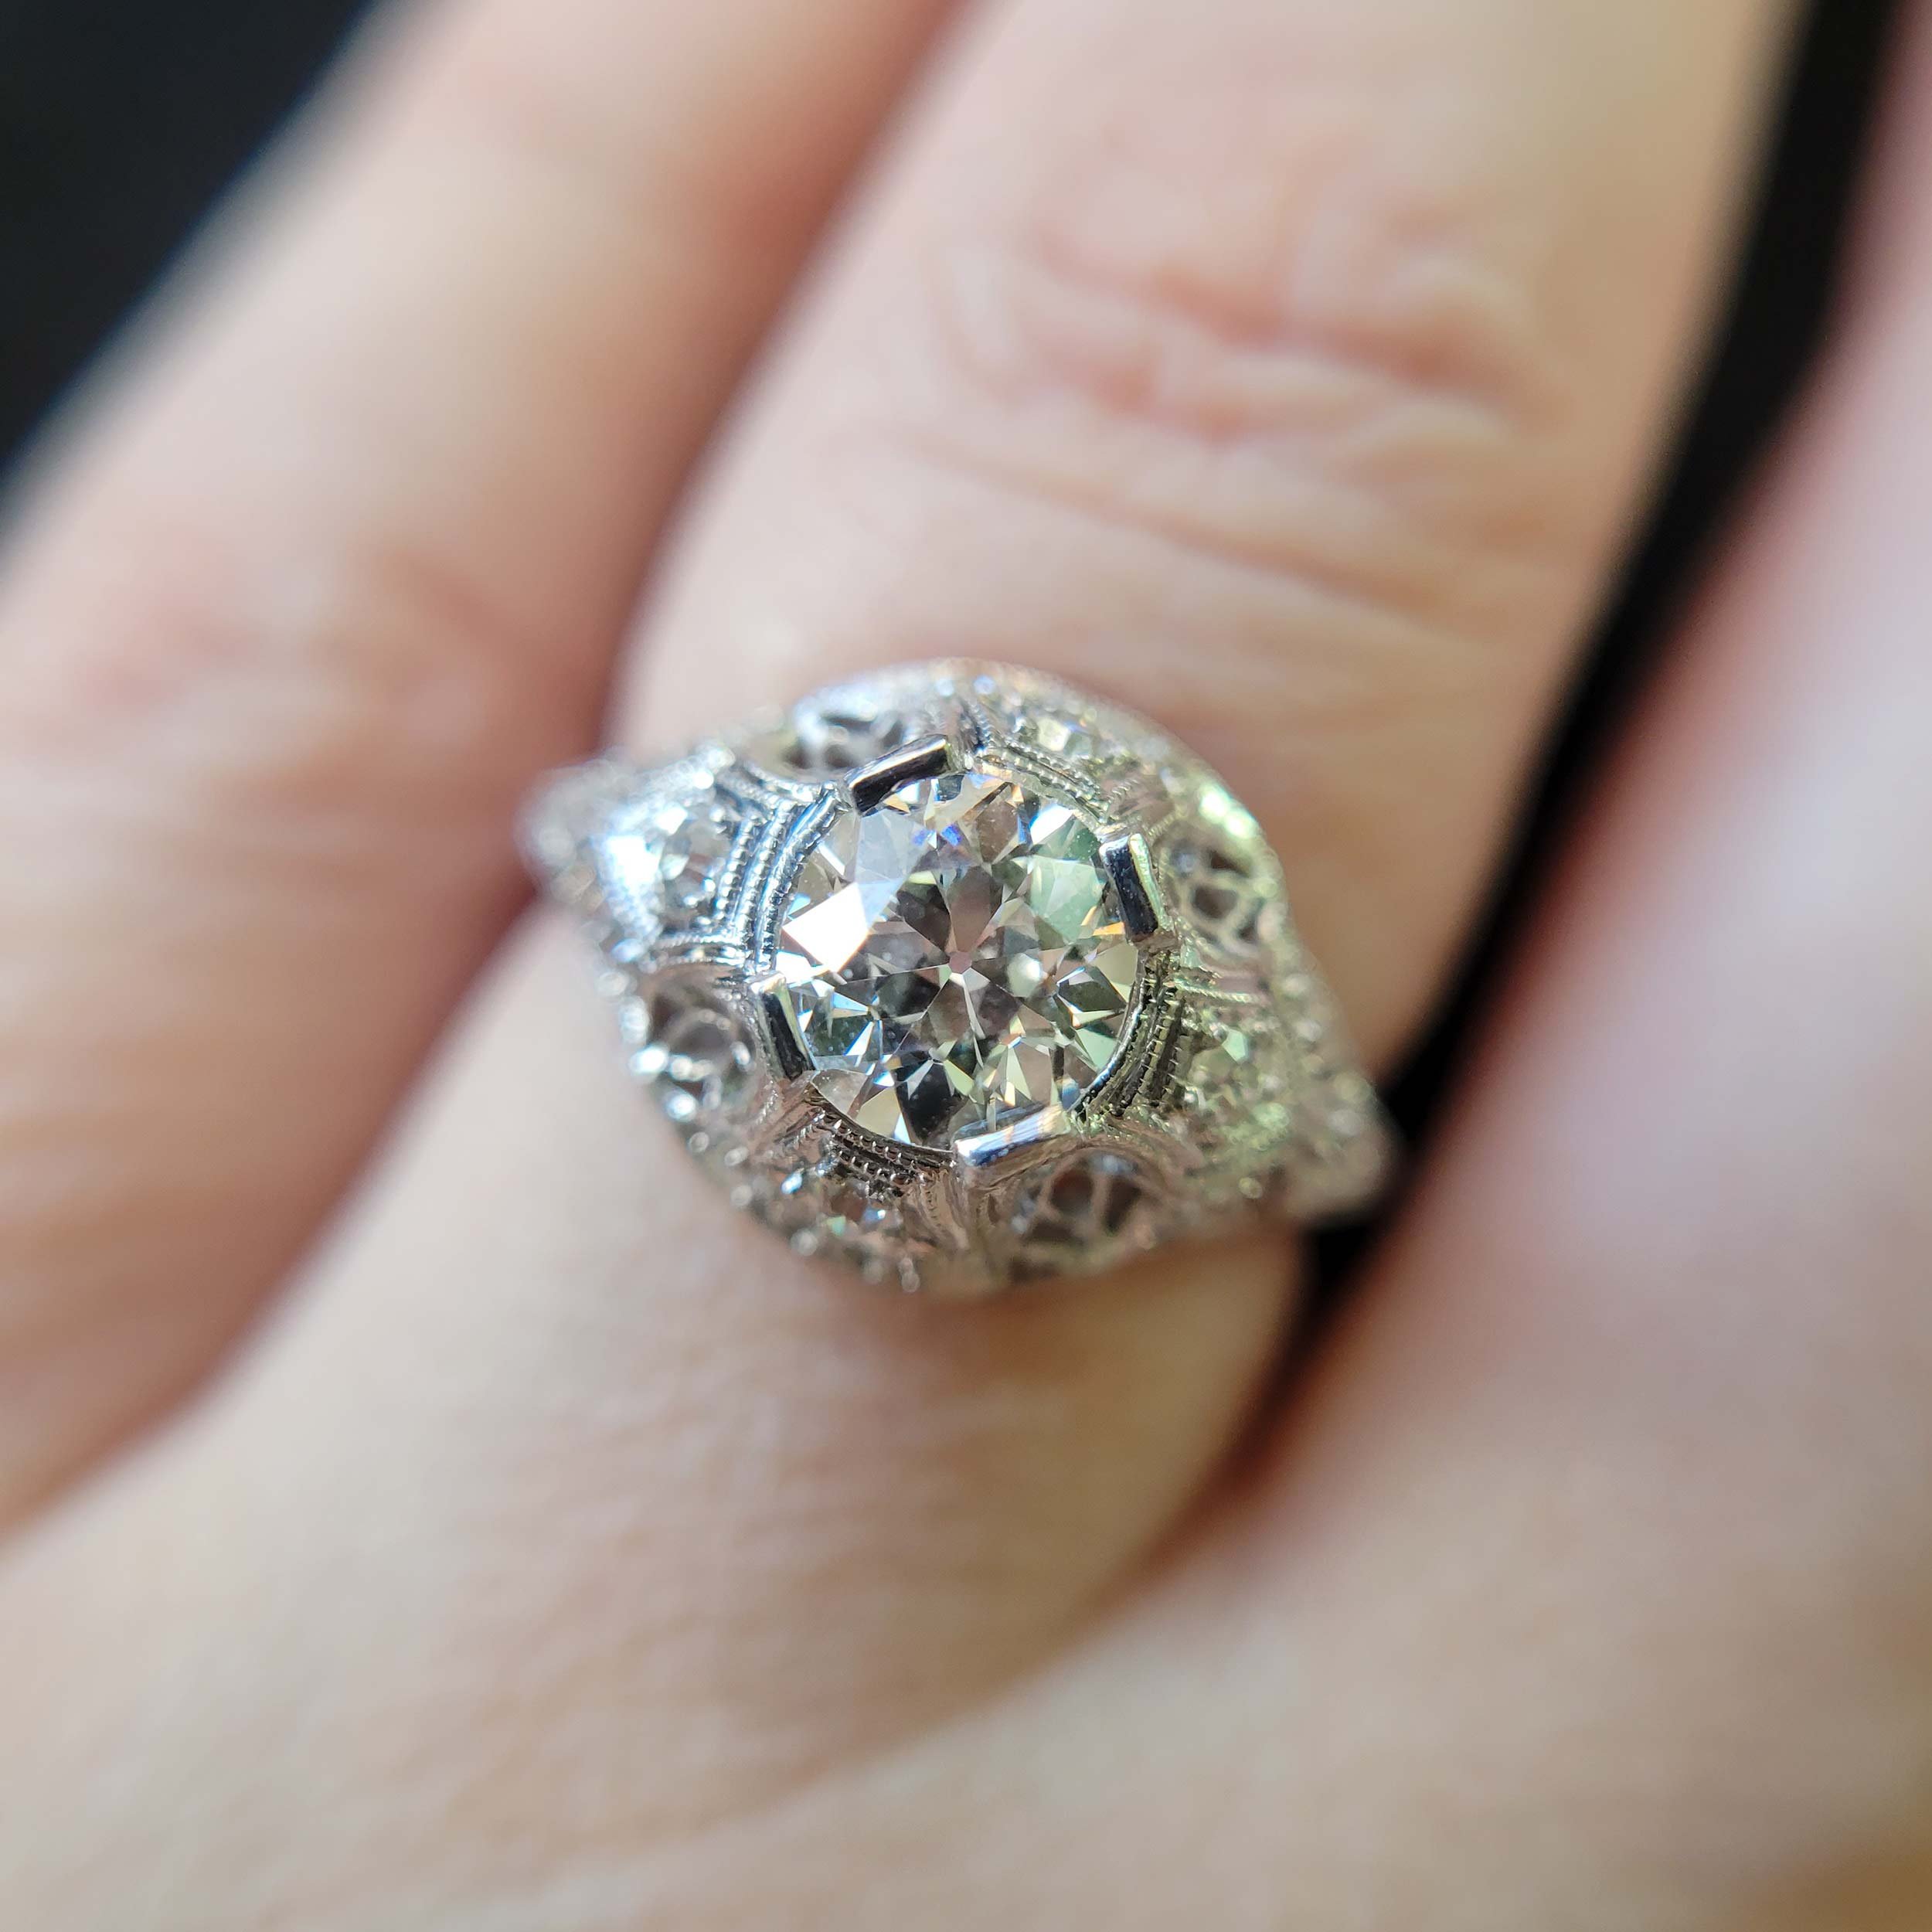 Old Mine Cut Diamonds: What They Are & Why We Love Them